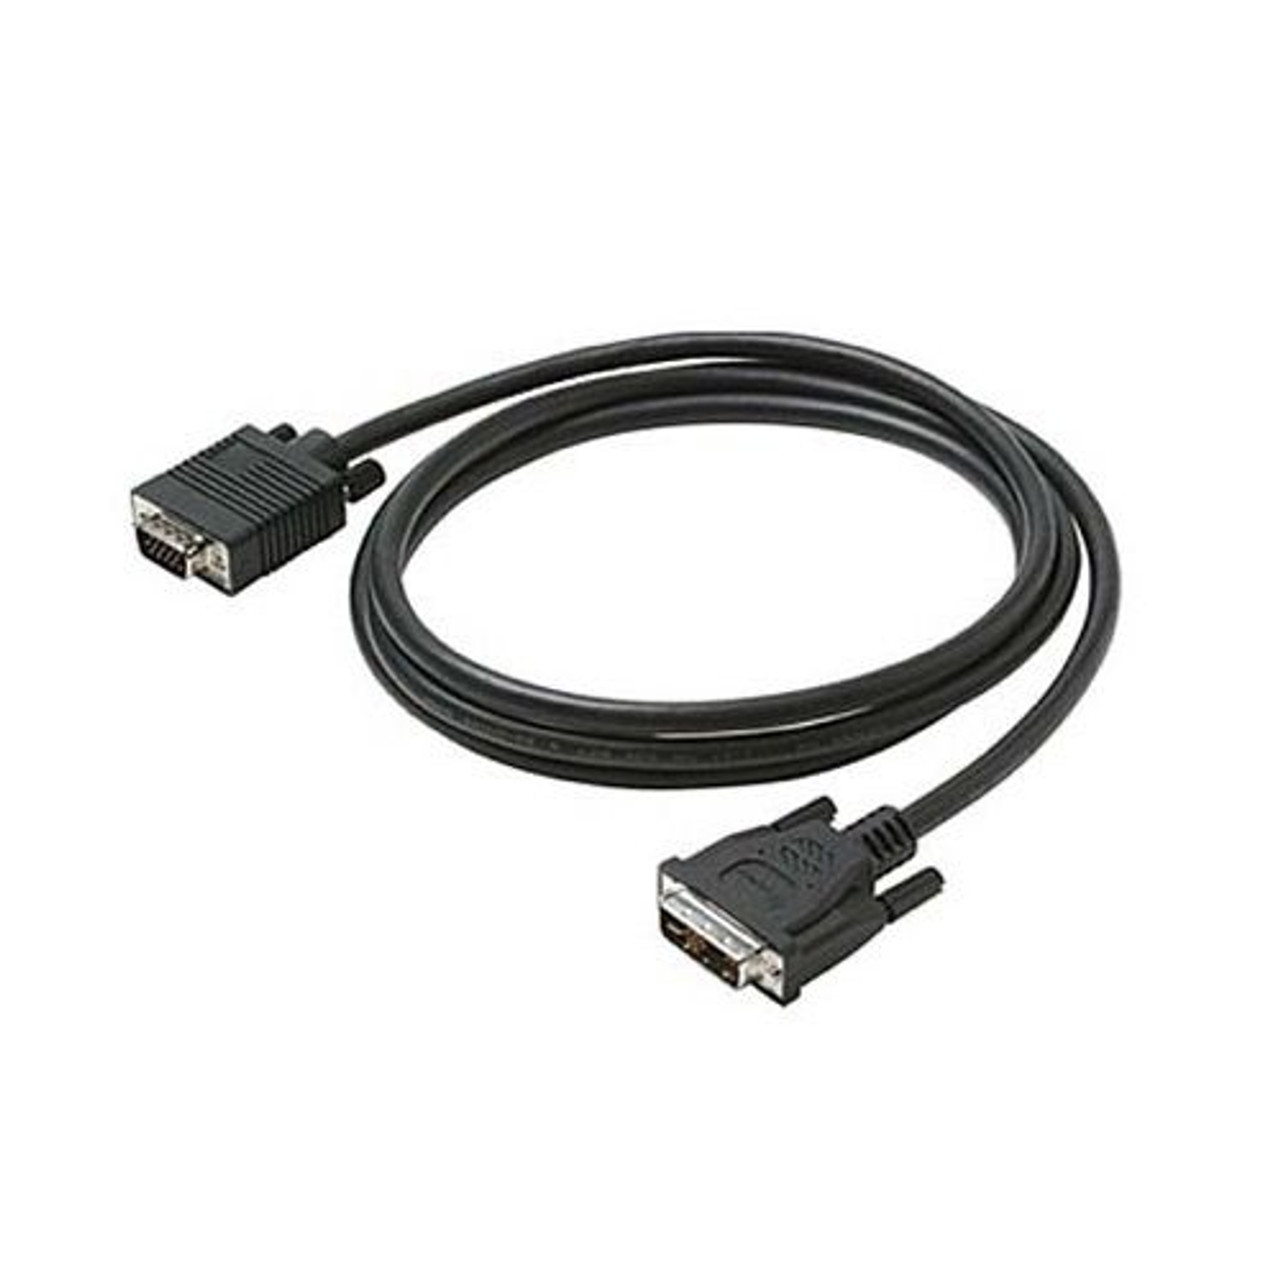 Eagle 6' FT DVI Analog Male to VGA Dgital HD15M Adapter Cable 15 24K Gold Plated Contacts Premium Resolution PVC Jacket